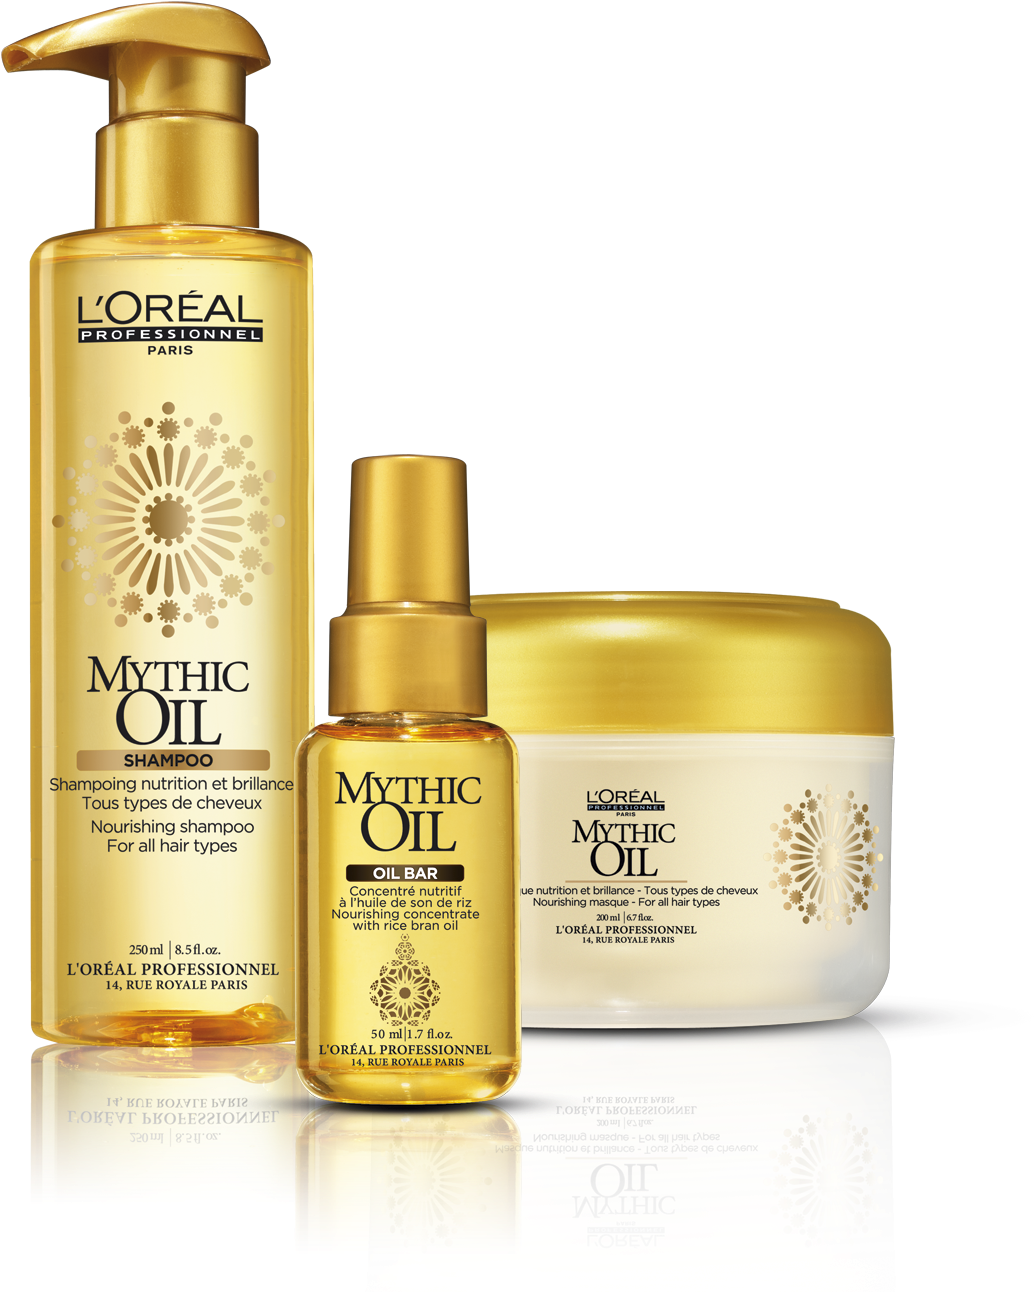 L'oreal Mythic Oil Hair Care Products - L'oreal Professional Mythic Oil Shampoo 250ml (1360x1360), Png Download